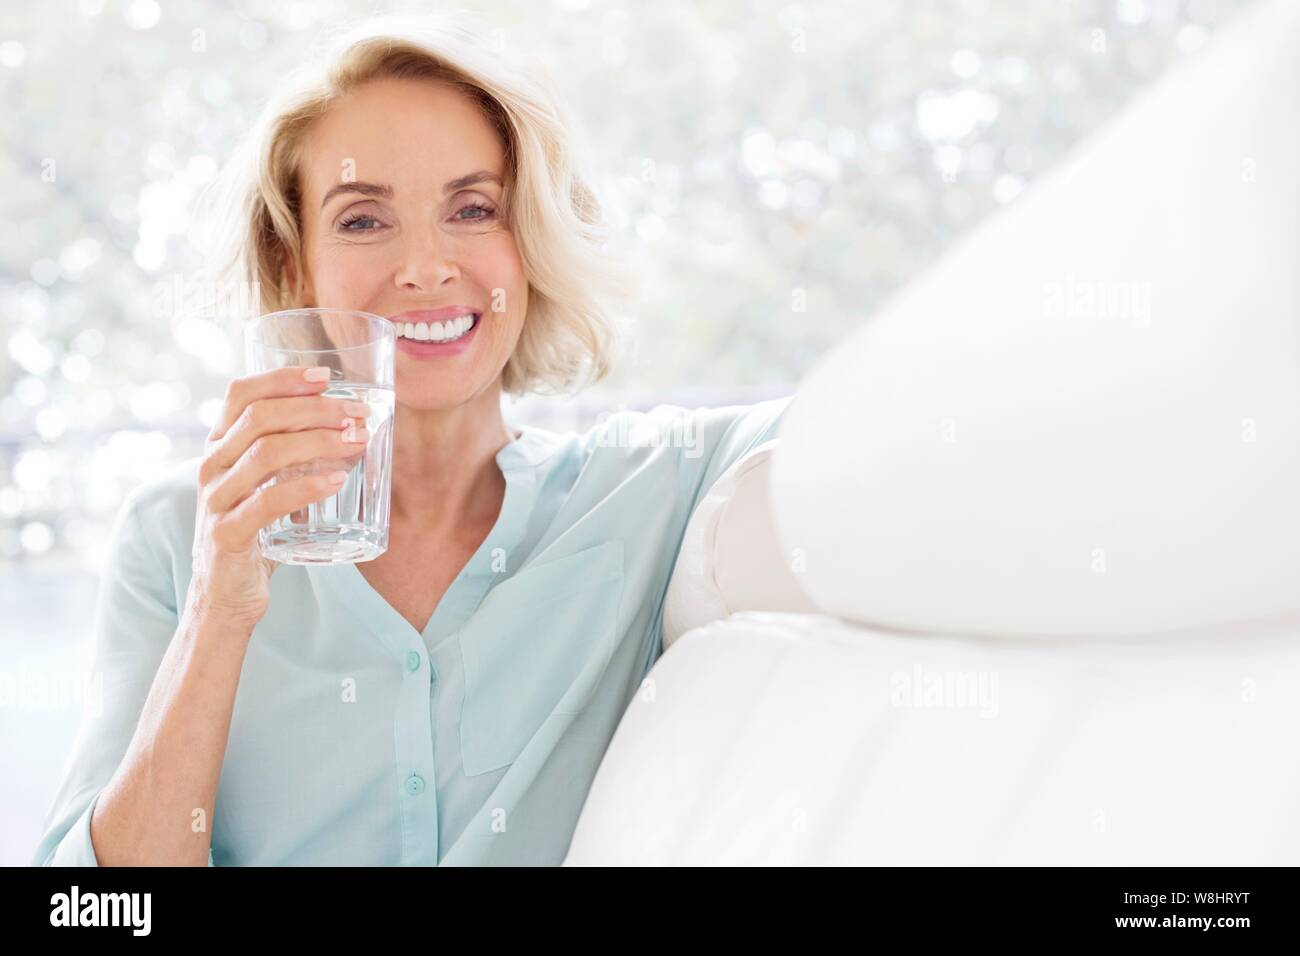 Mature woman smiling with glass of water. Stock Photo